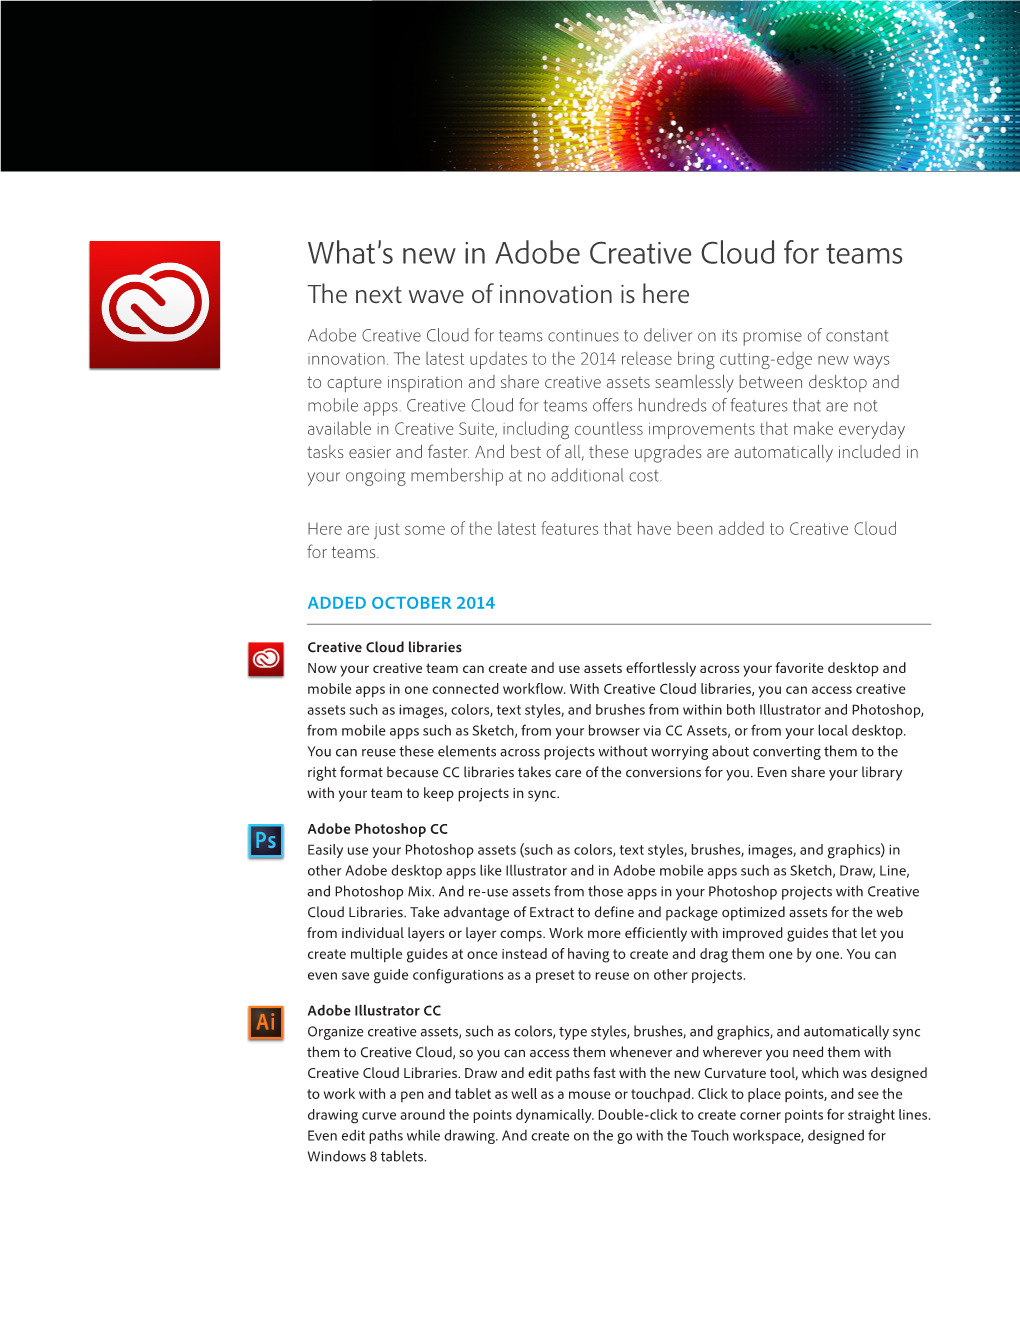 What's New in Adobe Creative Cloud for Teams